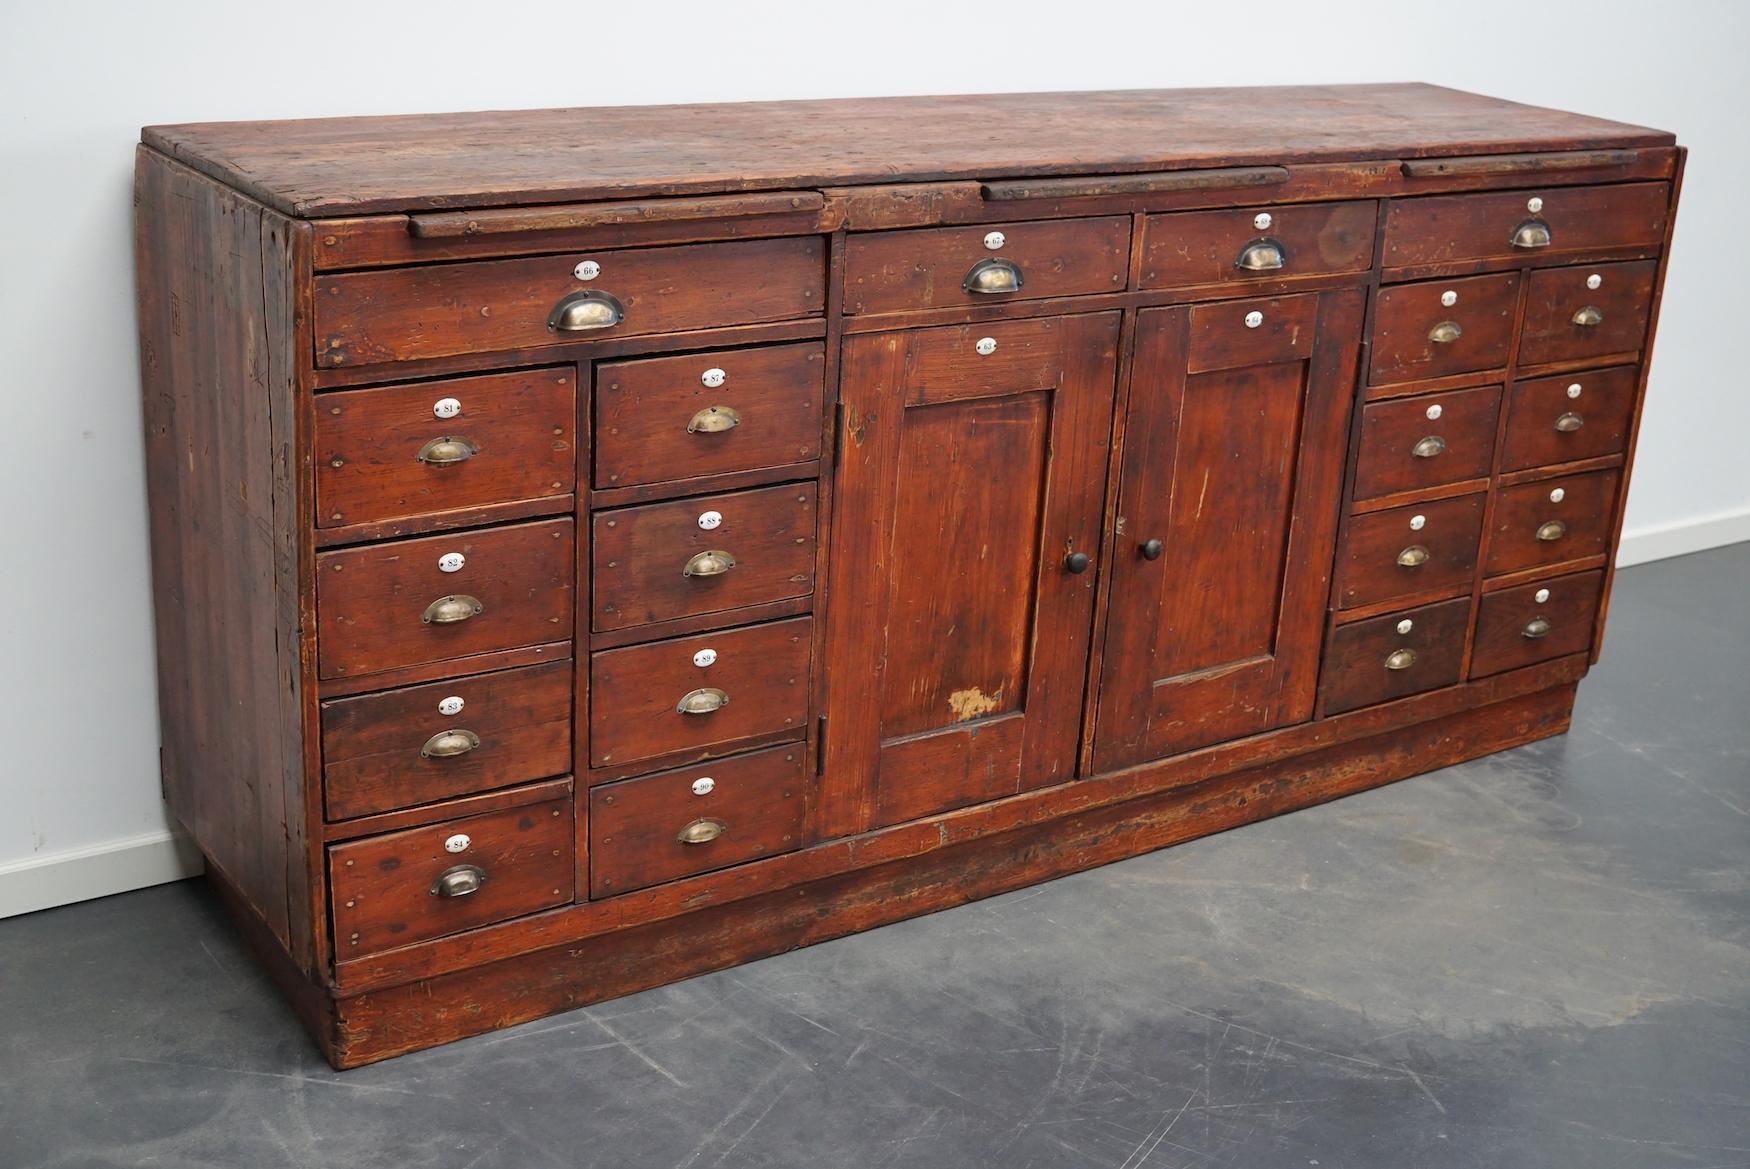 This workbench was designed and made in the early 20th century in the Netherlands. It features multiple drawers in different sizes and two doors with a shelve behind it. The cabinet is fitted with brass cup handles and the original enamel numbers,